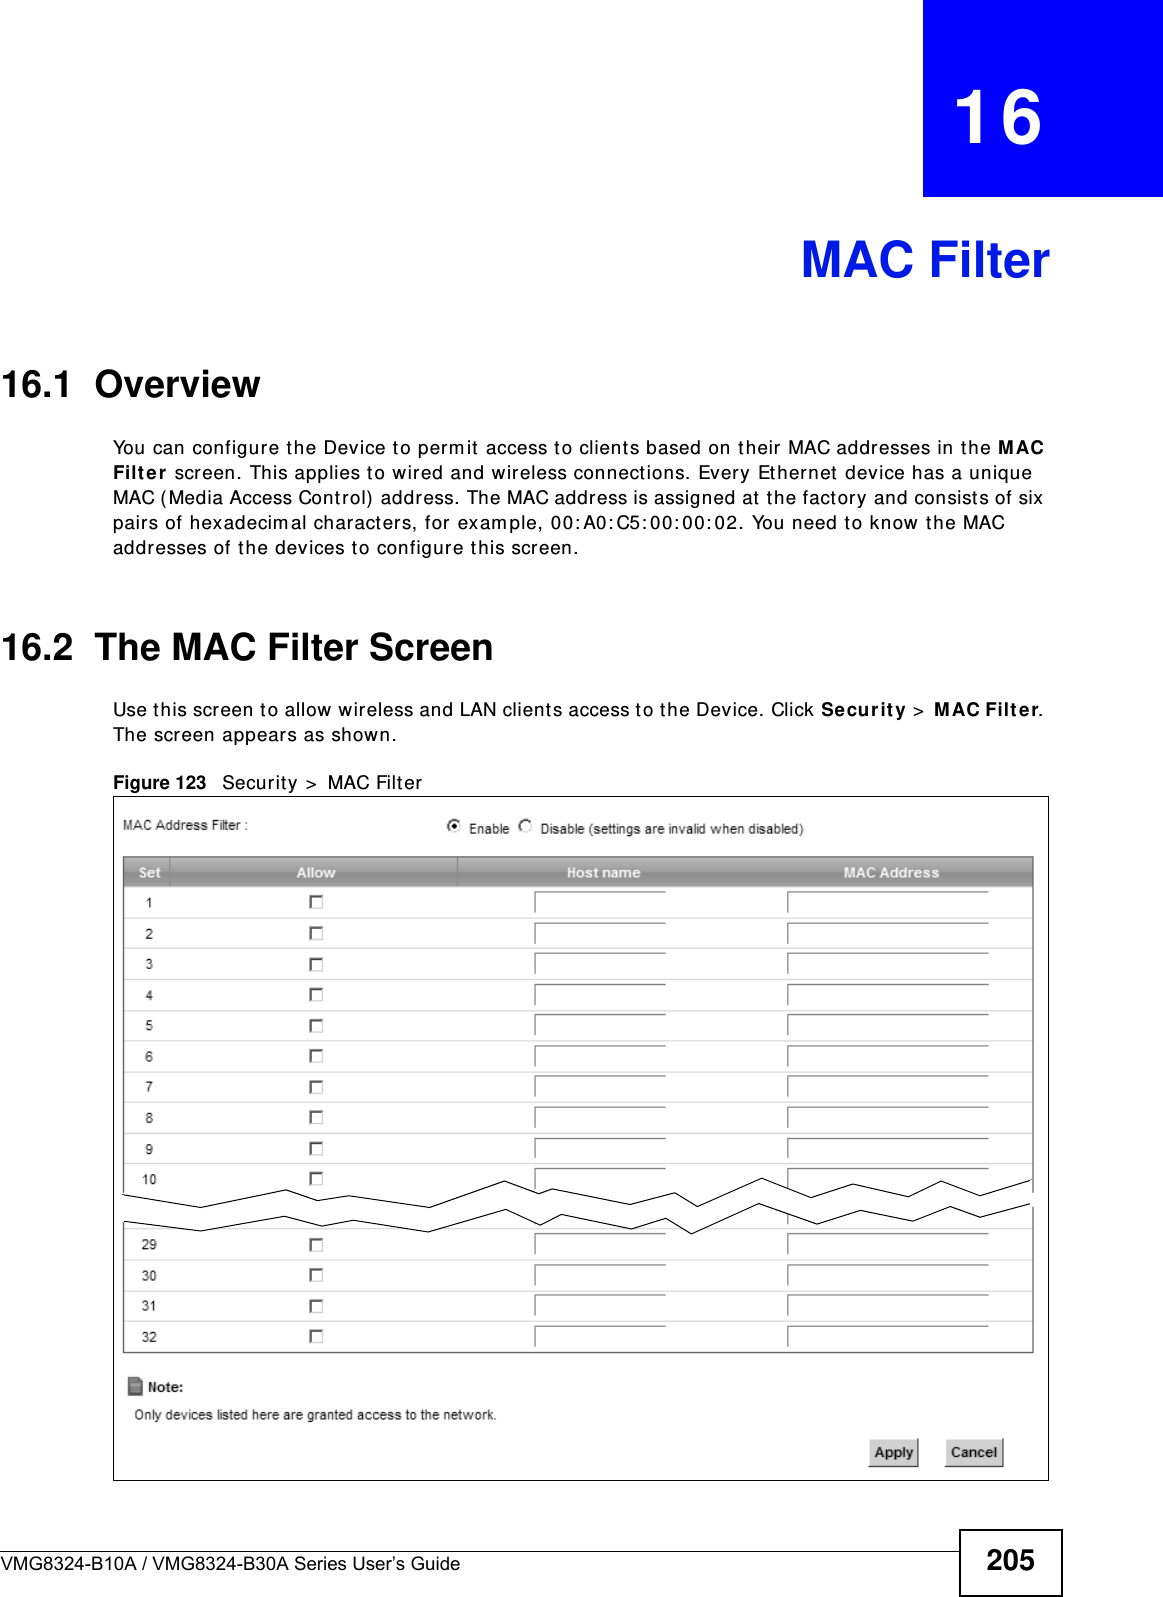 VMG8324-B10A / VMG8324-B30A Series User’s Guide 205CHAPTER   16MAC Filter16.1  Overview You can configure t he Device to perm it  access to clients based on t heir MAC addresses in t he M AC Filt e r  screen. This applies t o wired and wireless connect ions. Every Et hernet  device has a unique MAC ( Media Access Control)  address. The MAC address is assigned at  t he fact ory and consist s of six pairs of hexadecim al charact ers, for exam ple, 00: A0: C5: 00: 00: 02. You need t o know the MAC addresses of the devices t o configure t his screen.16.2  The MAC Filter ScreenUse t his scr een t o allow wireless and LAN client s access to the Device. Click Securit y  &gt;  M AC Filt e r. The screen appears as shown.Figure 123   Security &gt;  MAC Filt er